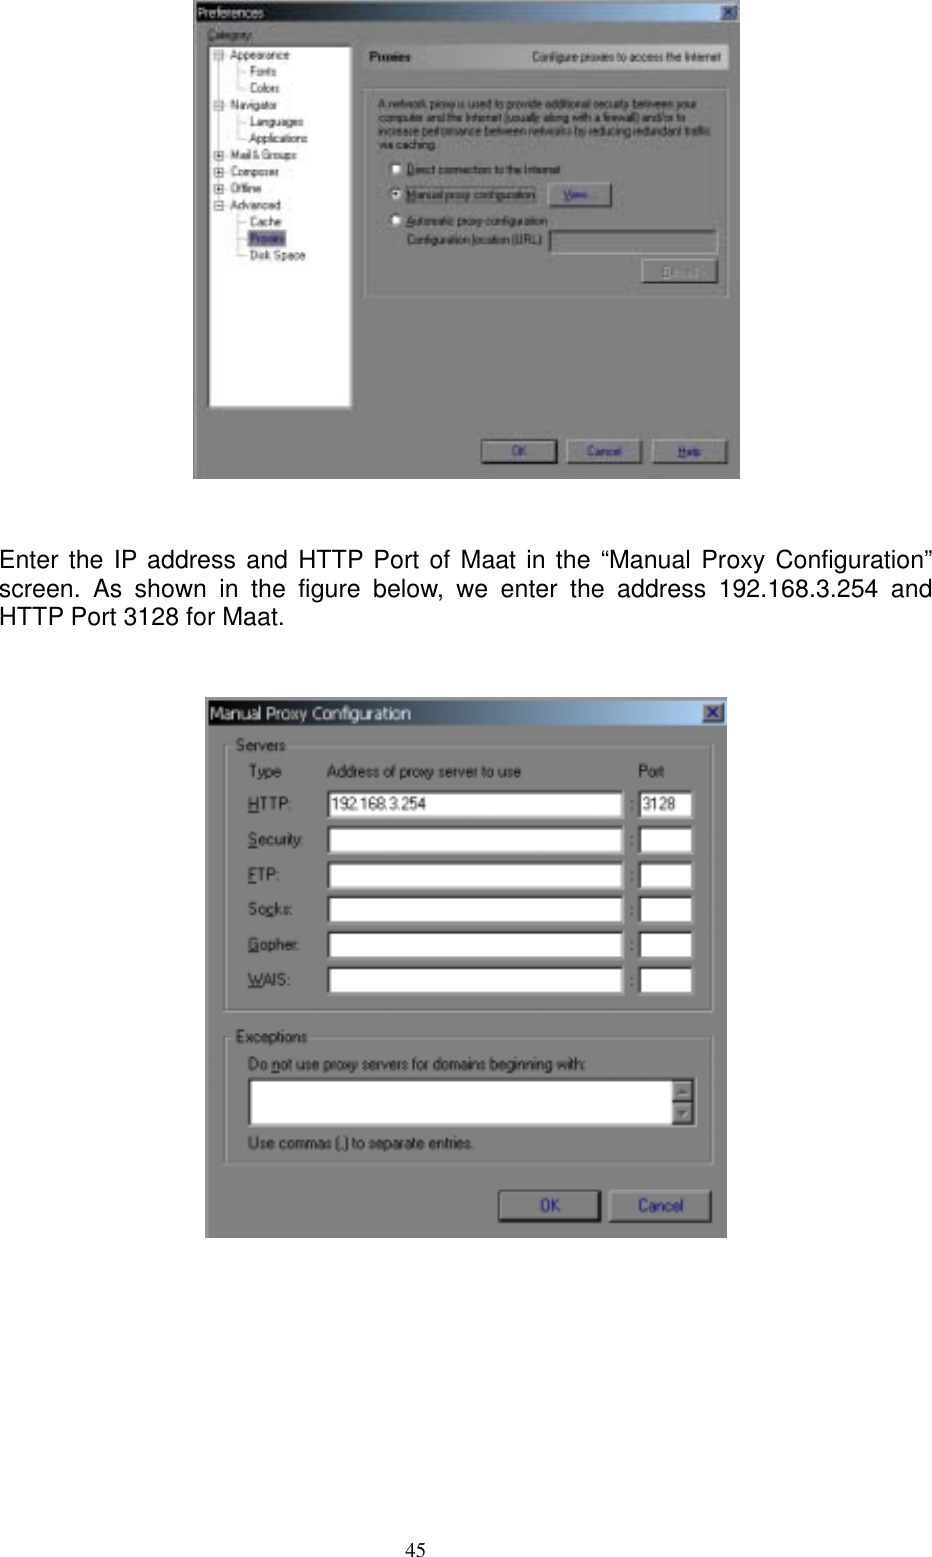  45  Enter the IP address and HTTP Port of Maat in the “Manual Proxy Configuration” screen. As shown in the figure below, we enter the address 192.168.3.254 and HTTP Port 3128 for Maat.     